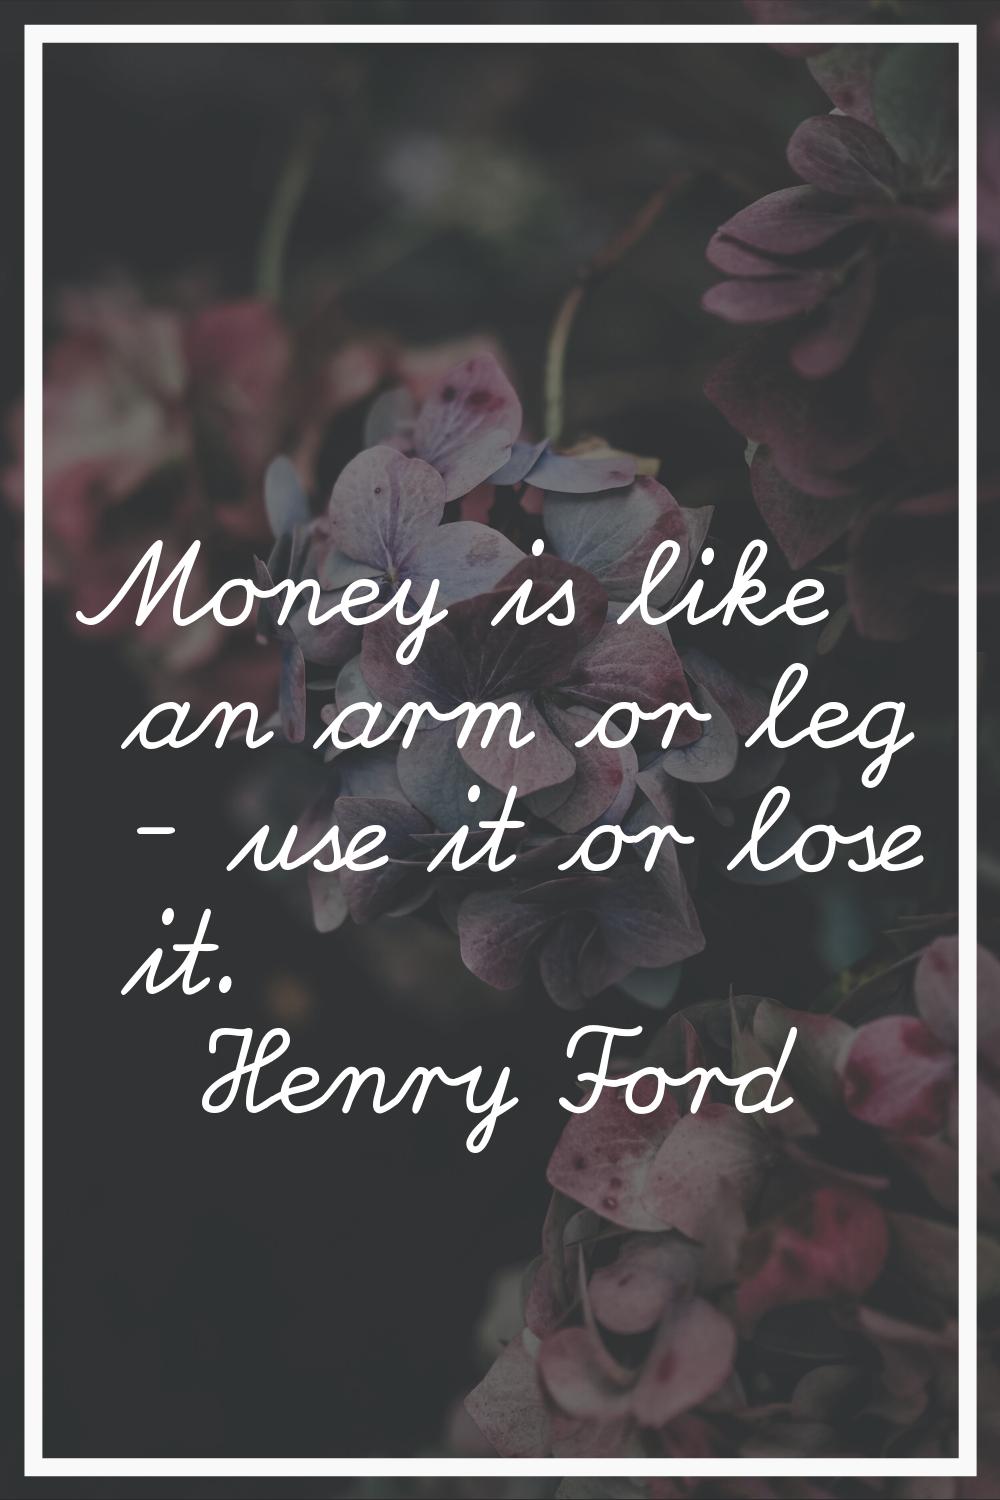 Money is like an arm or leg - use it or lose it.